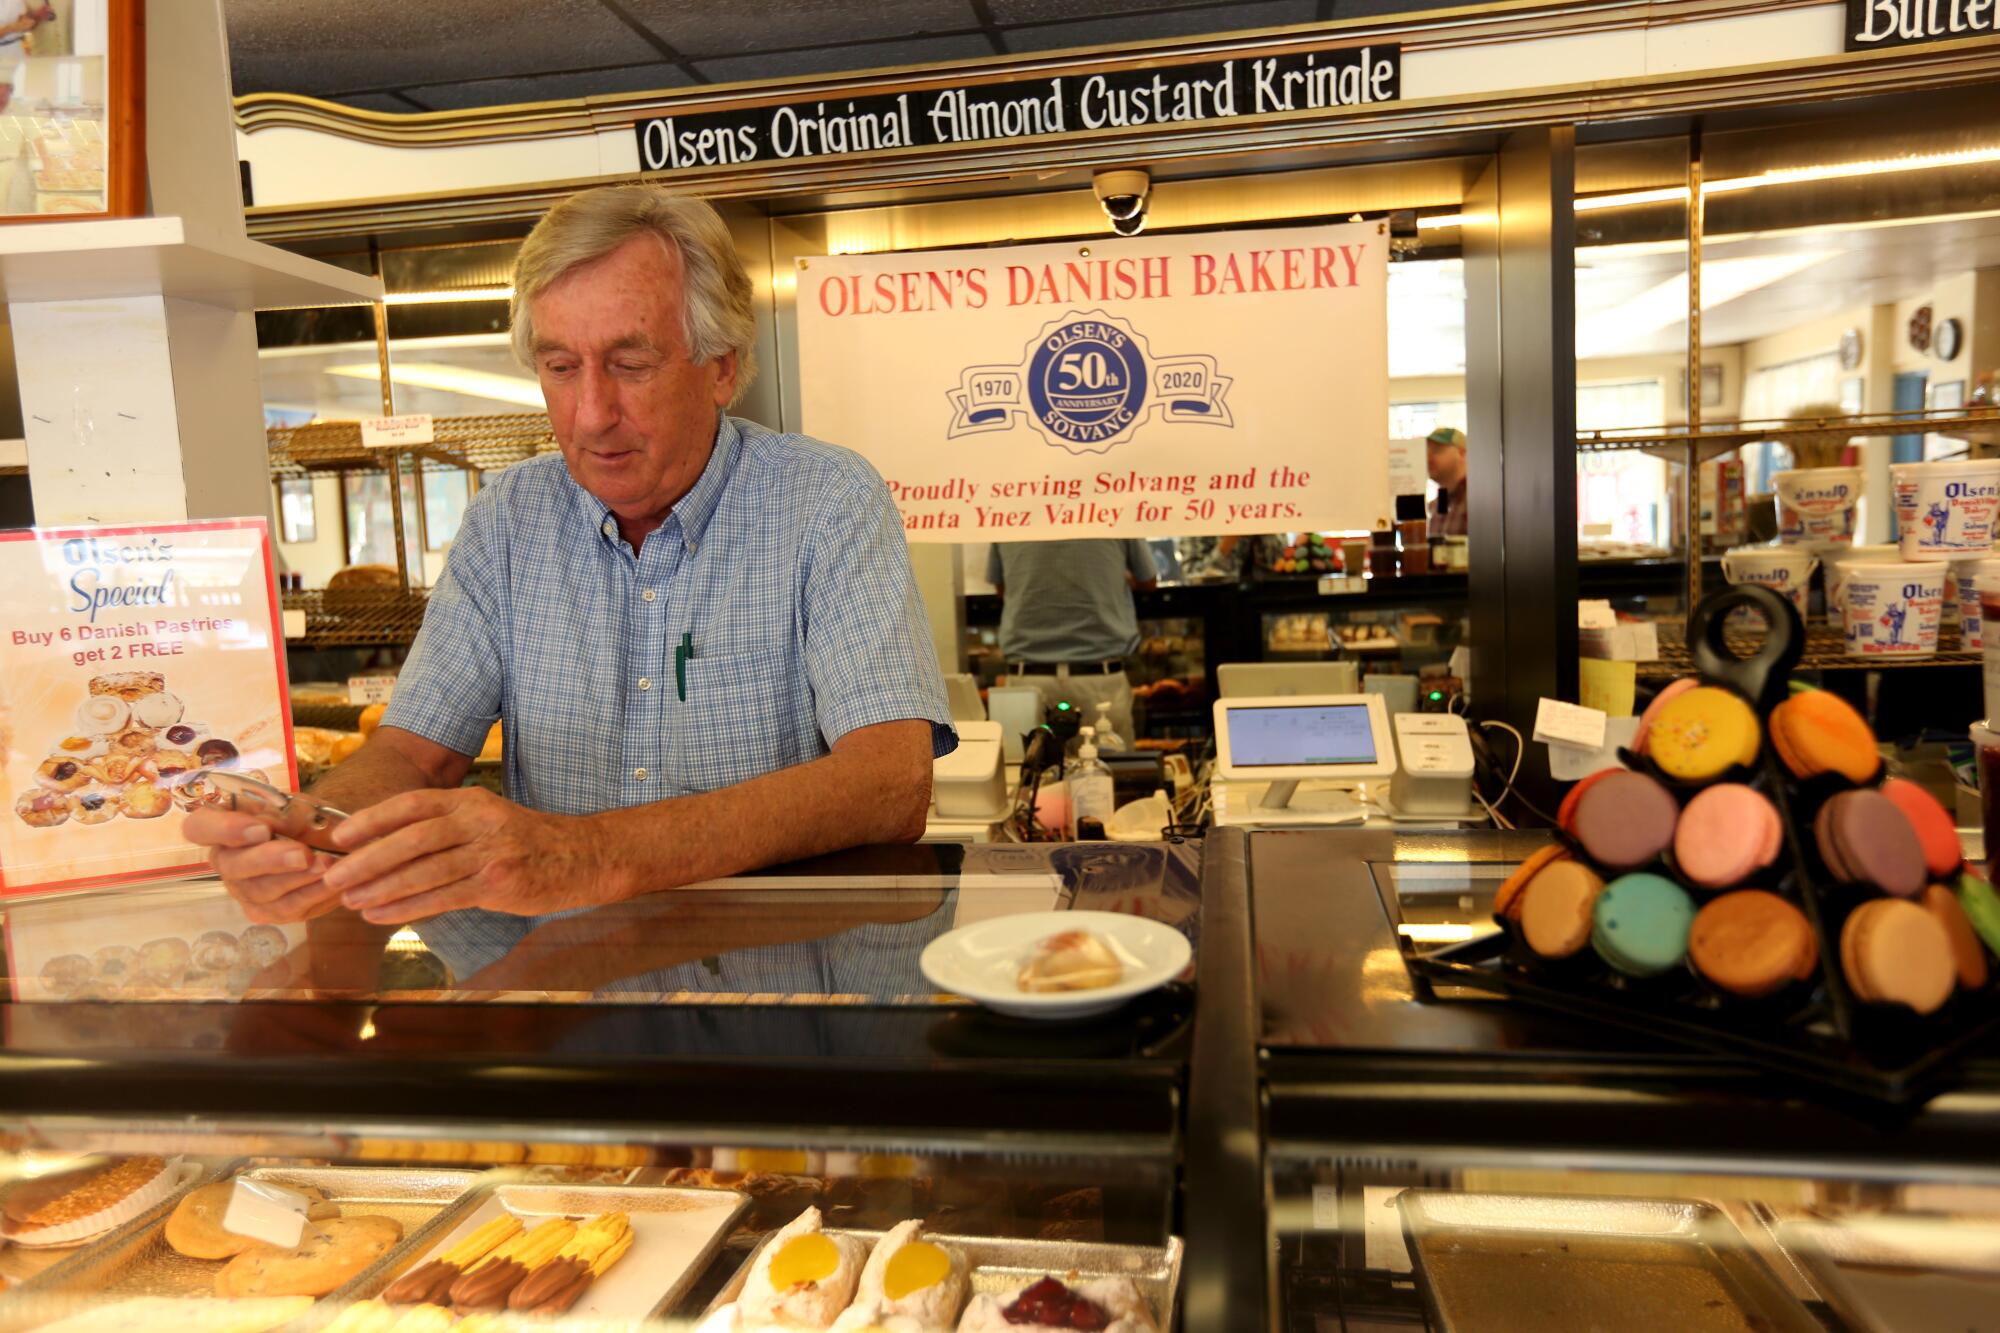 "After the war, that was not very good times," said Bent Olsen, 76, owner of Olsen's Danish Village Bakery, and continues to sell pastries and coffee to go in Solvang. "We kind of learned how to tighten our belt," he concluded.